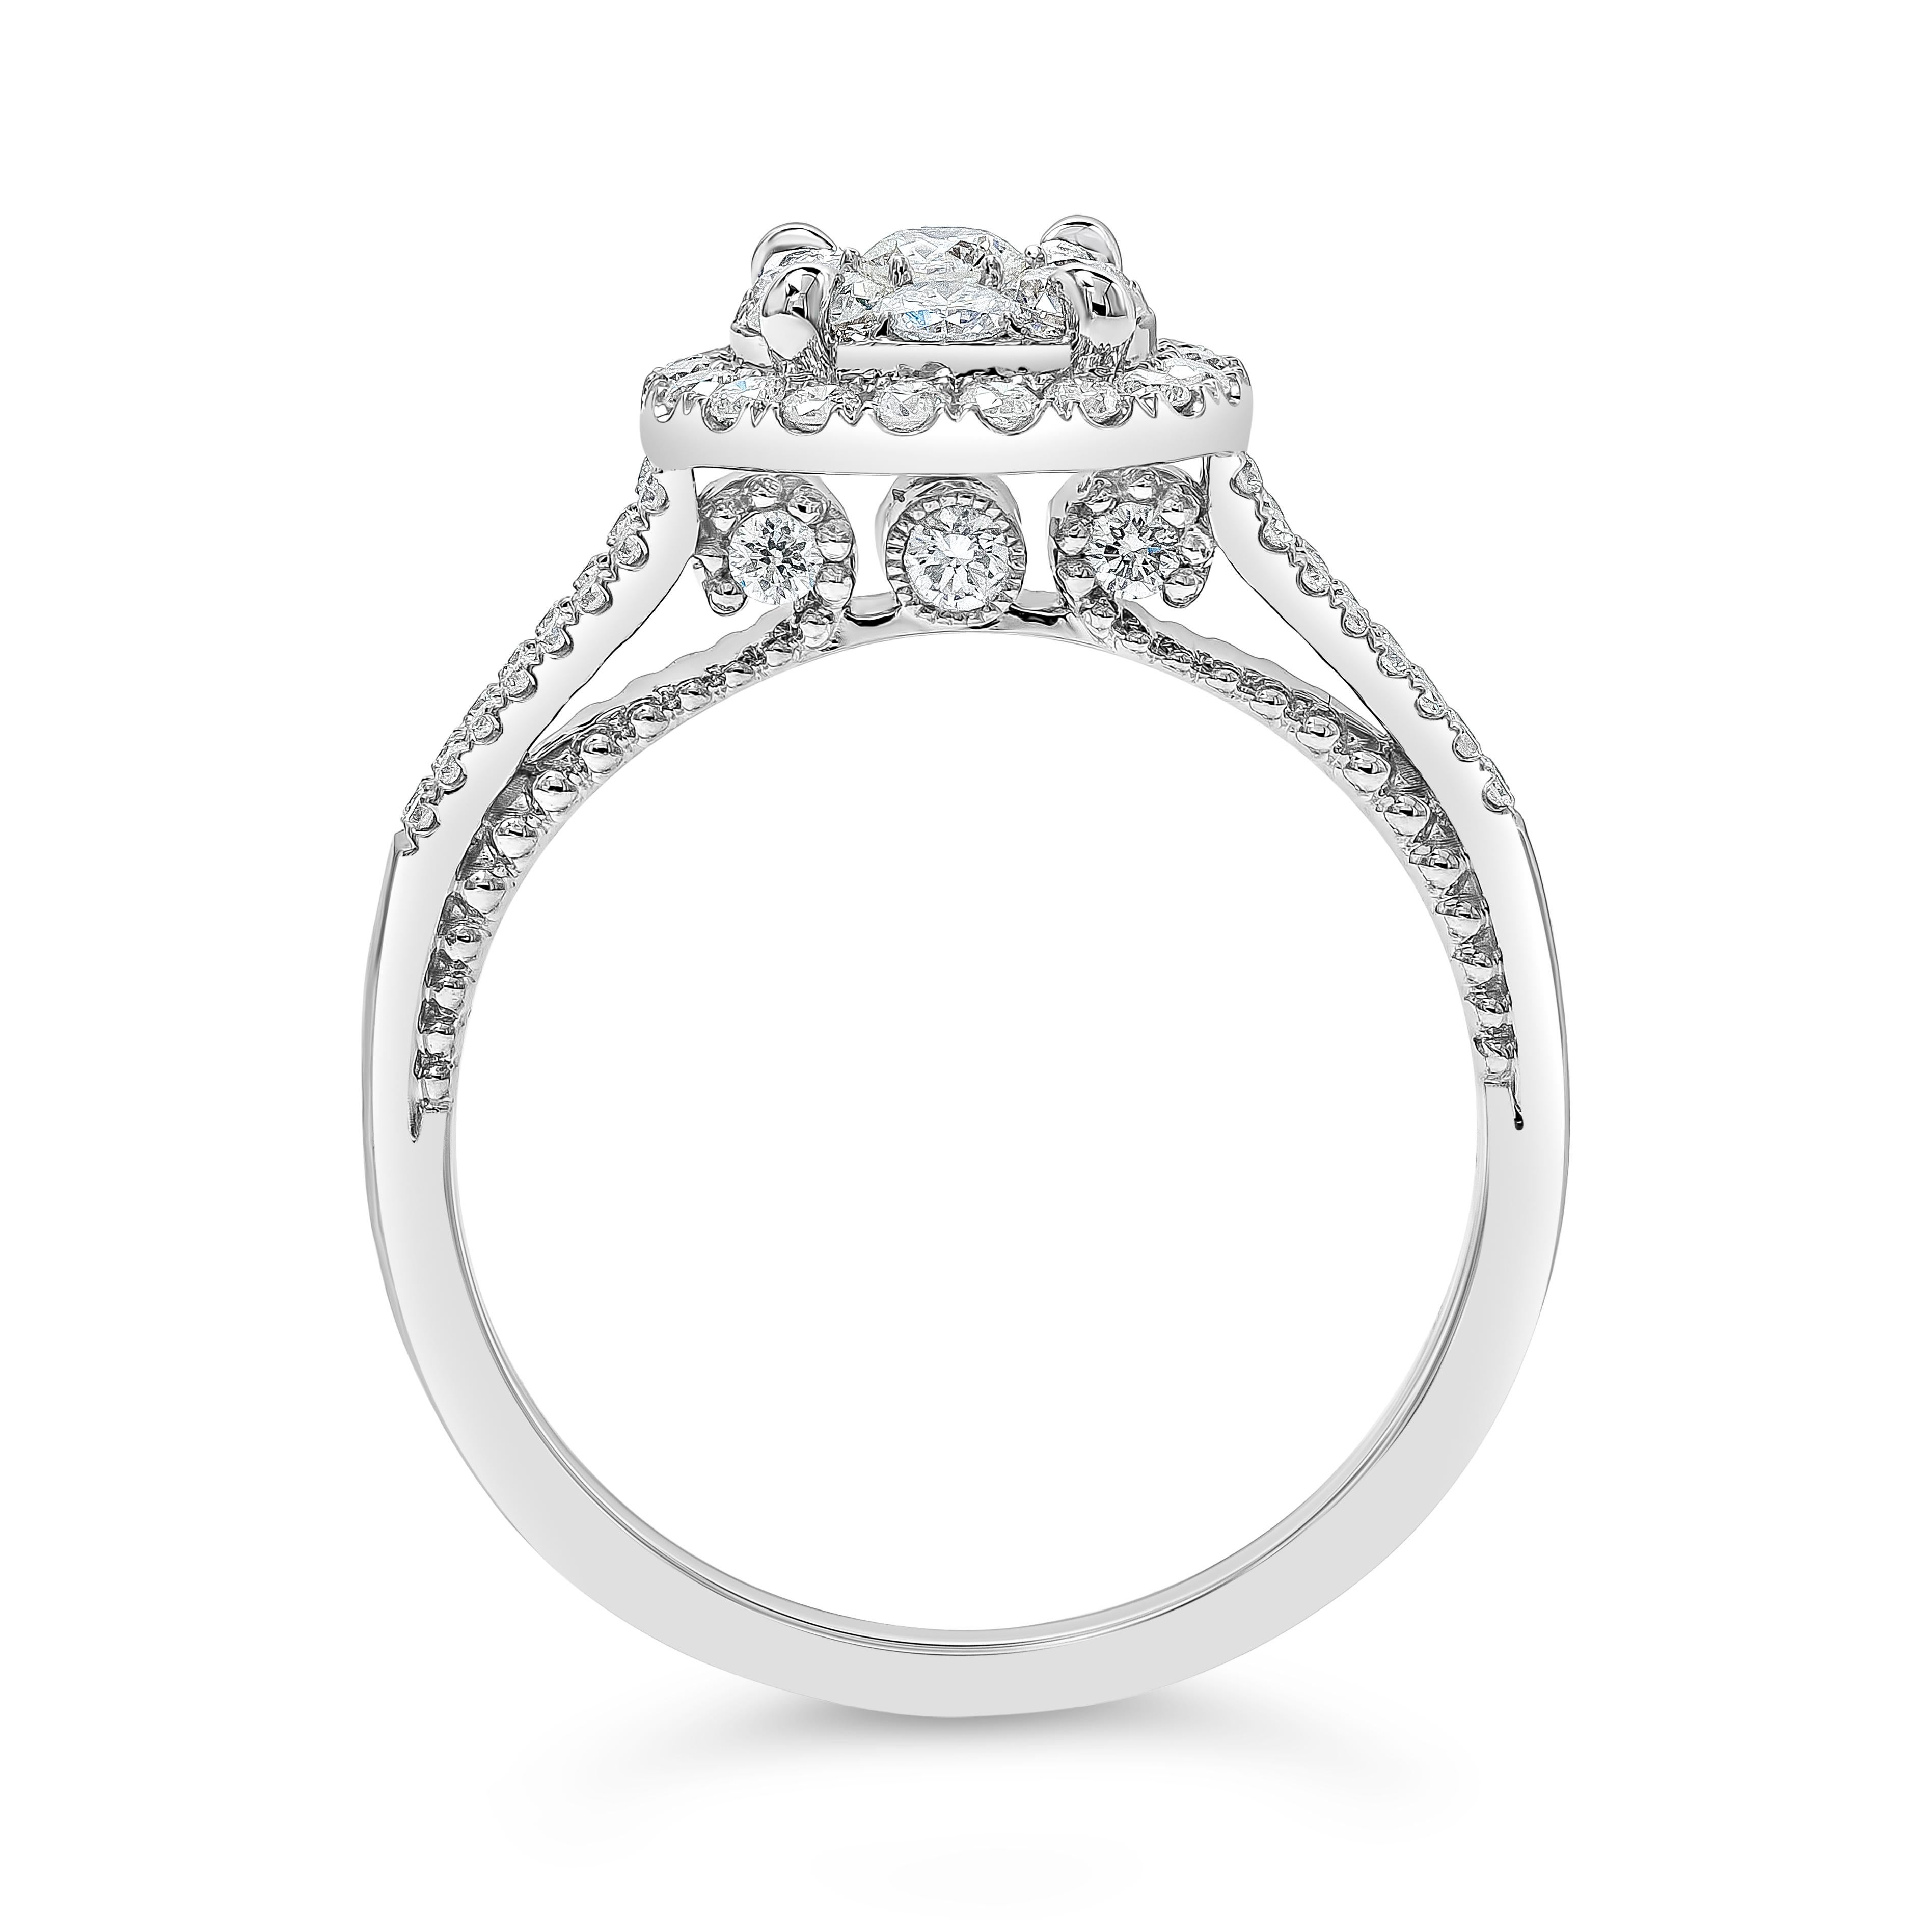 Showcasing a cluster of brilliant round cut diamonds, set in a diamond halo, split-shank mounting made in 14k white gold. Diamonds weigh 0.82 carats total and are approximately G-H color, VS-SI clarity. Finely made in 14k white gold and Size 6.25 US